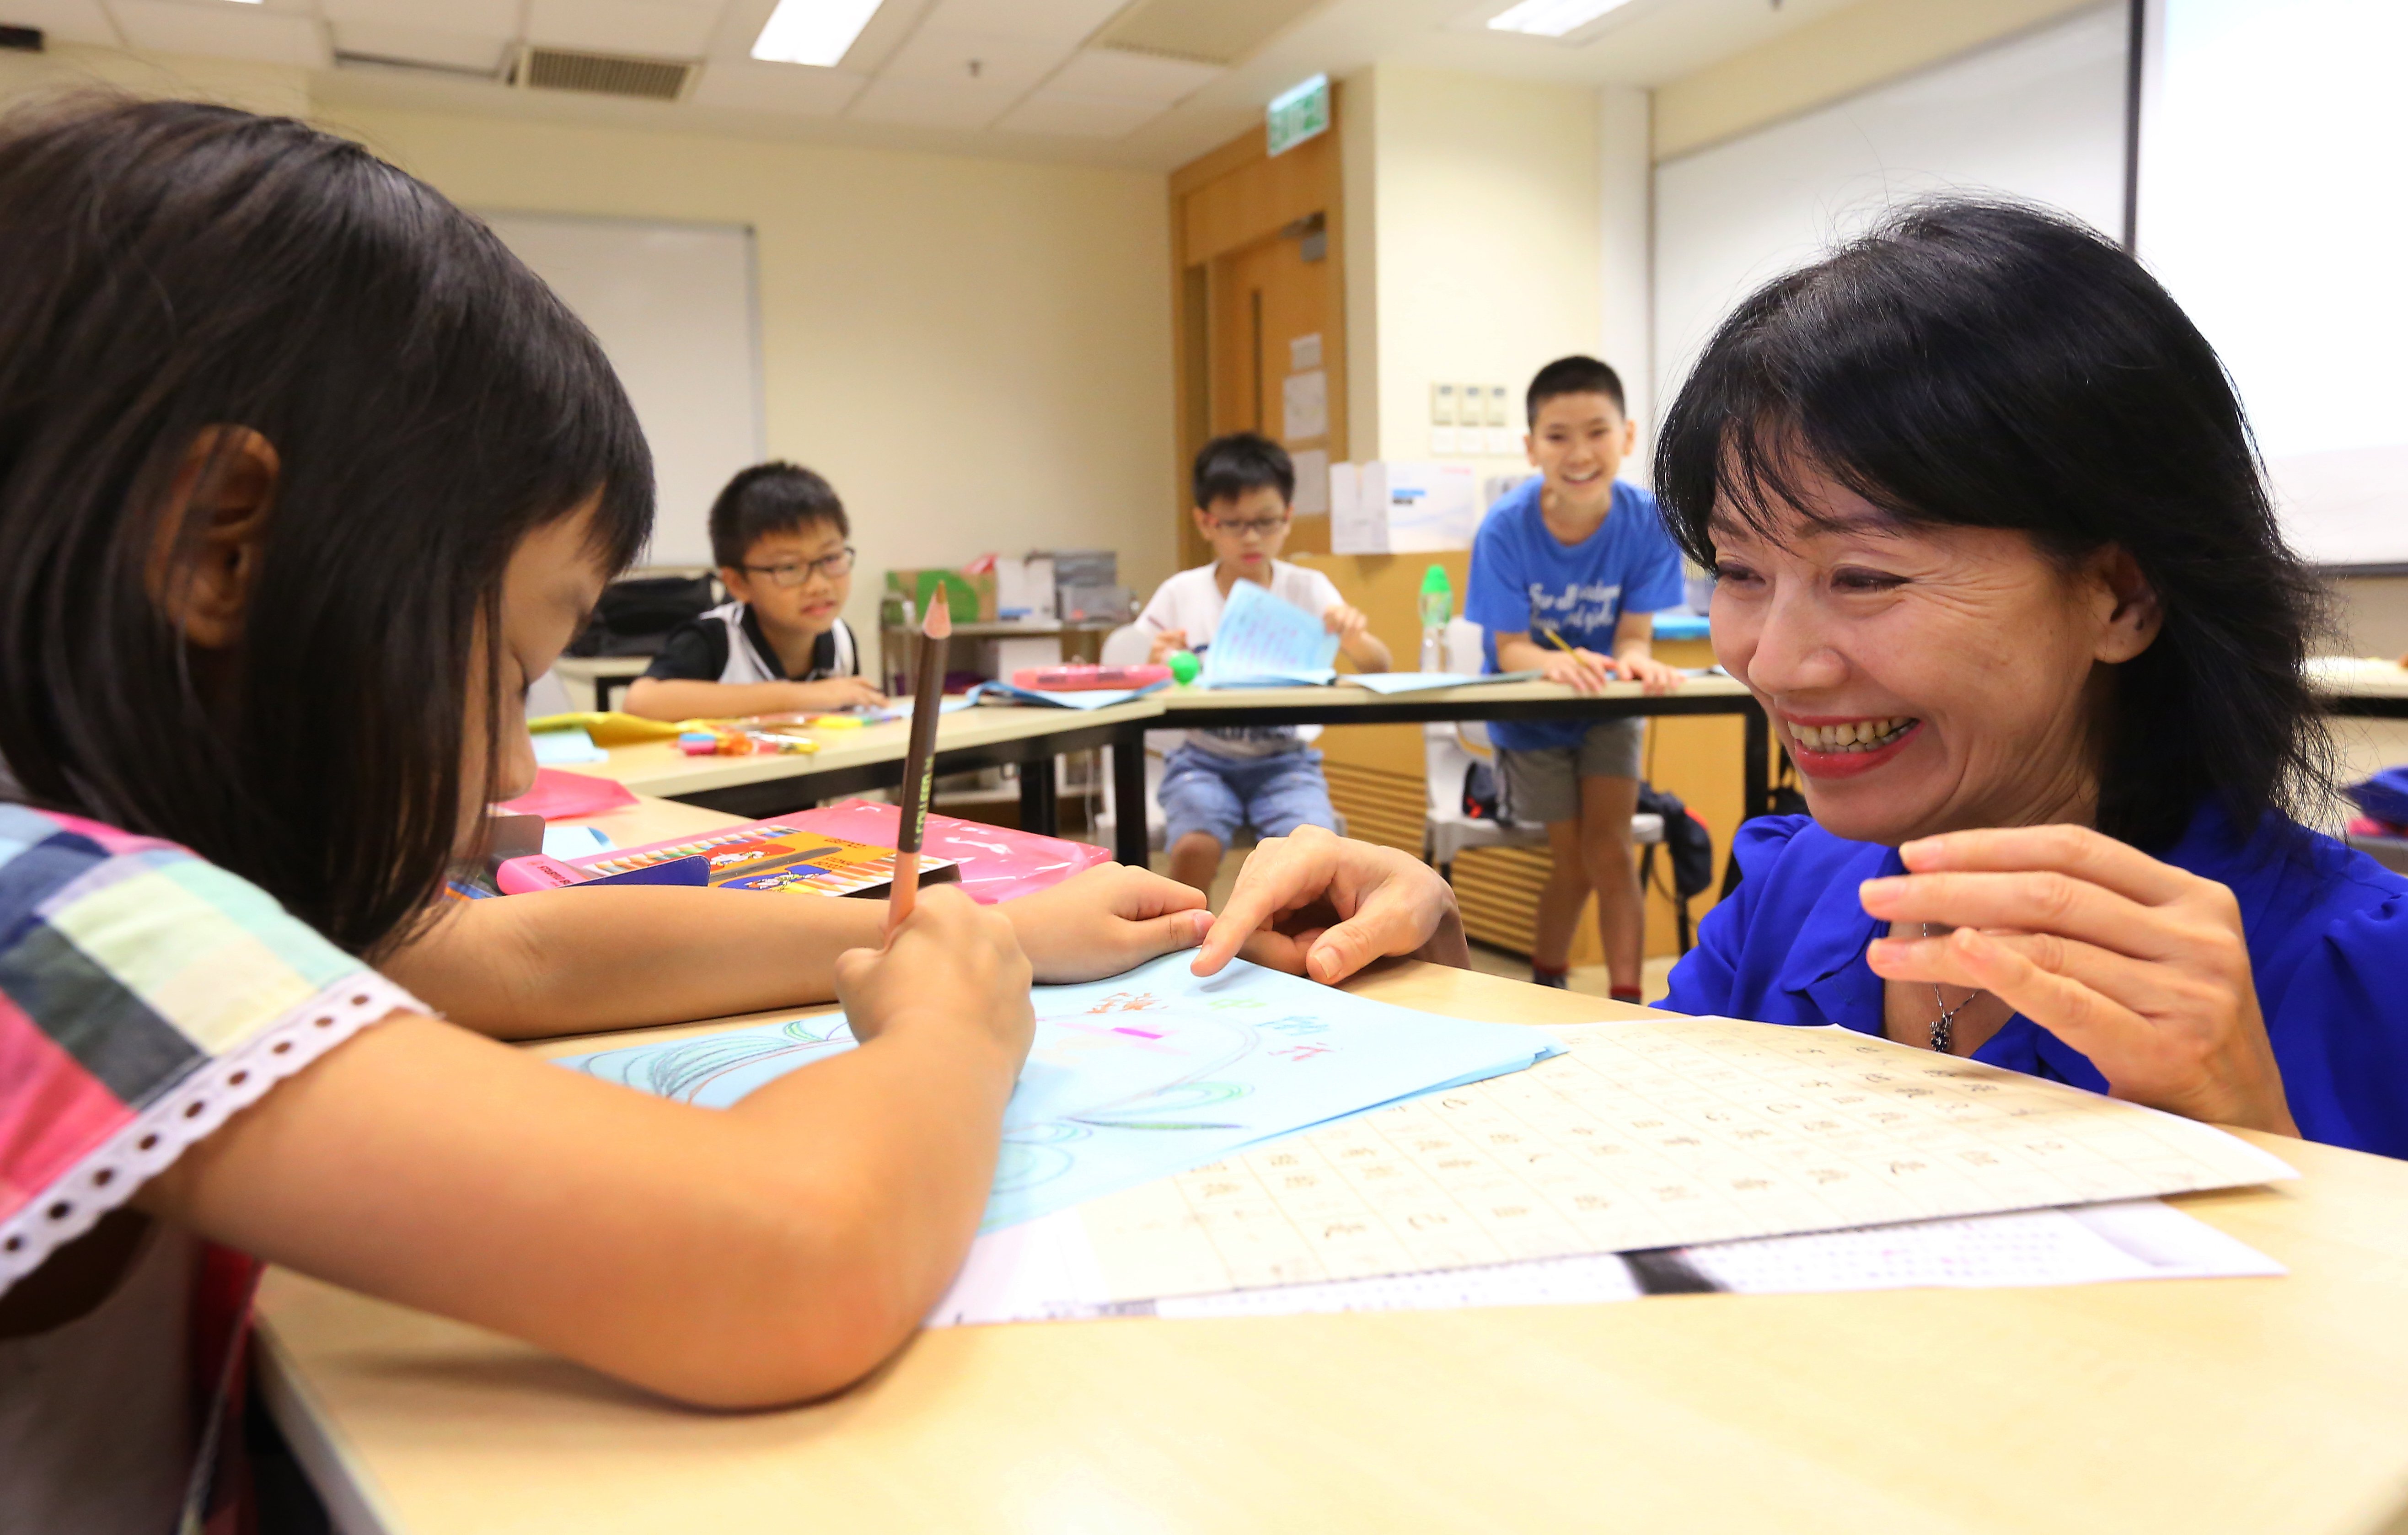 Dr Alice Lai Cheng Cheng-gea, Director of the Manulife Centre for Children with Specific Learning receiving training of students at Polytechnic University in Hung Hom. 11OCT14